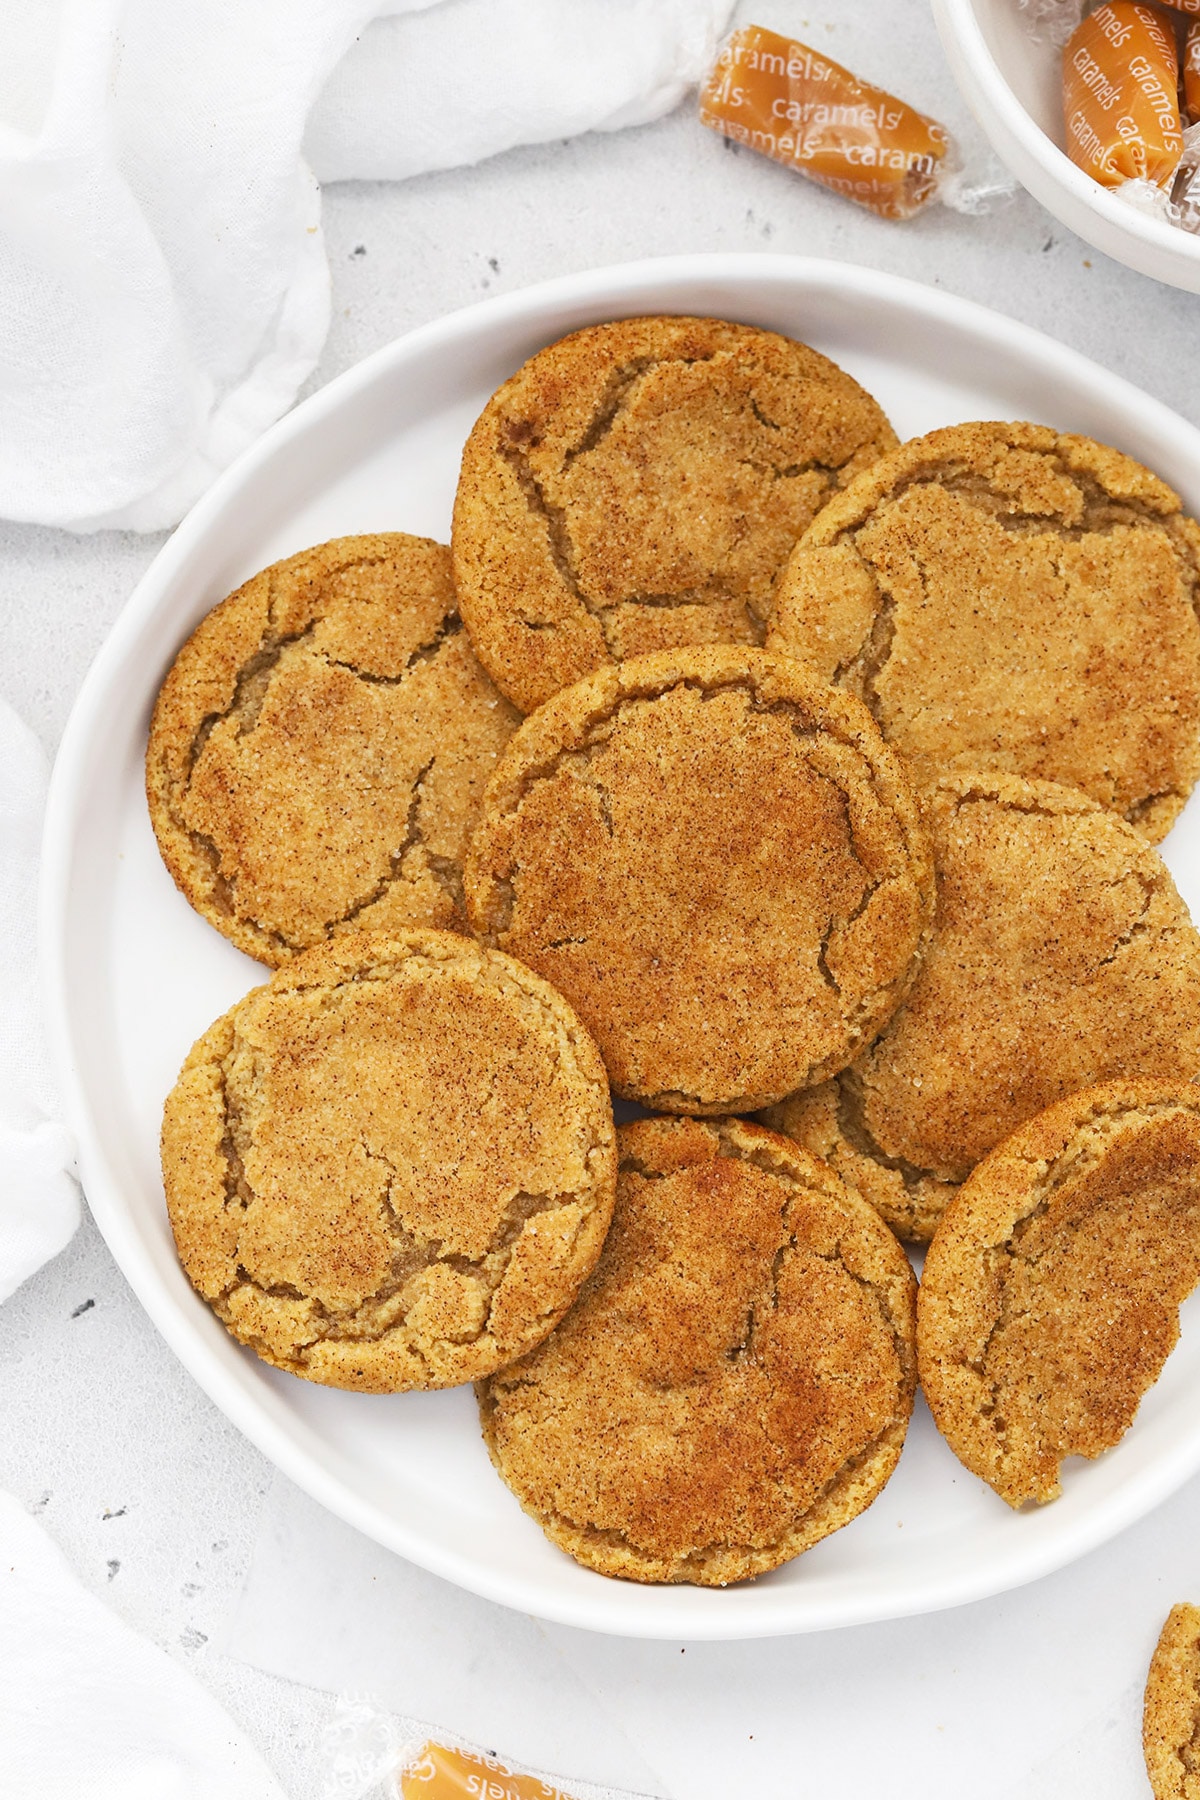 Overhead view of a plate of gluten-free brown butter caramel snickerdoodles